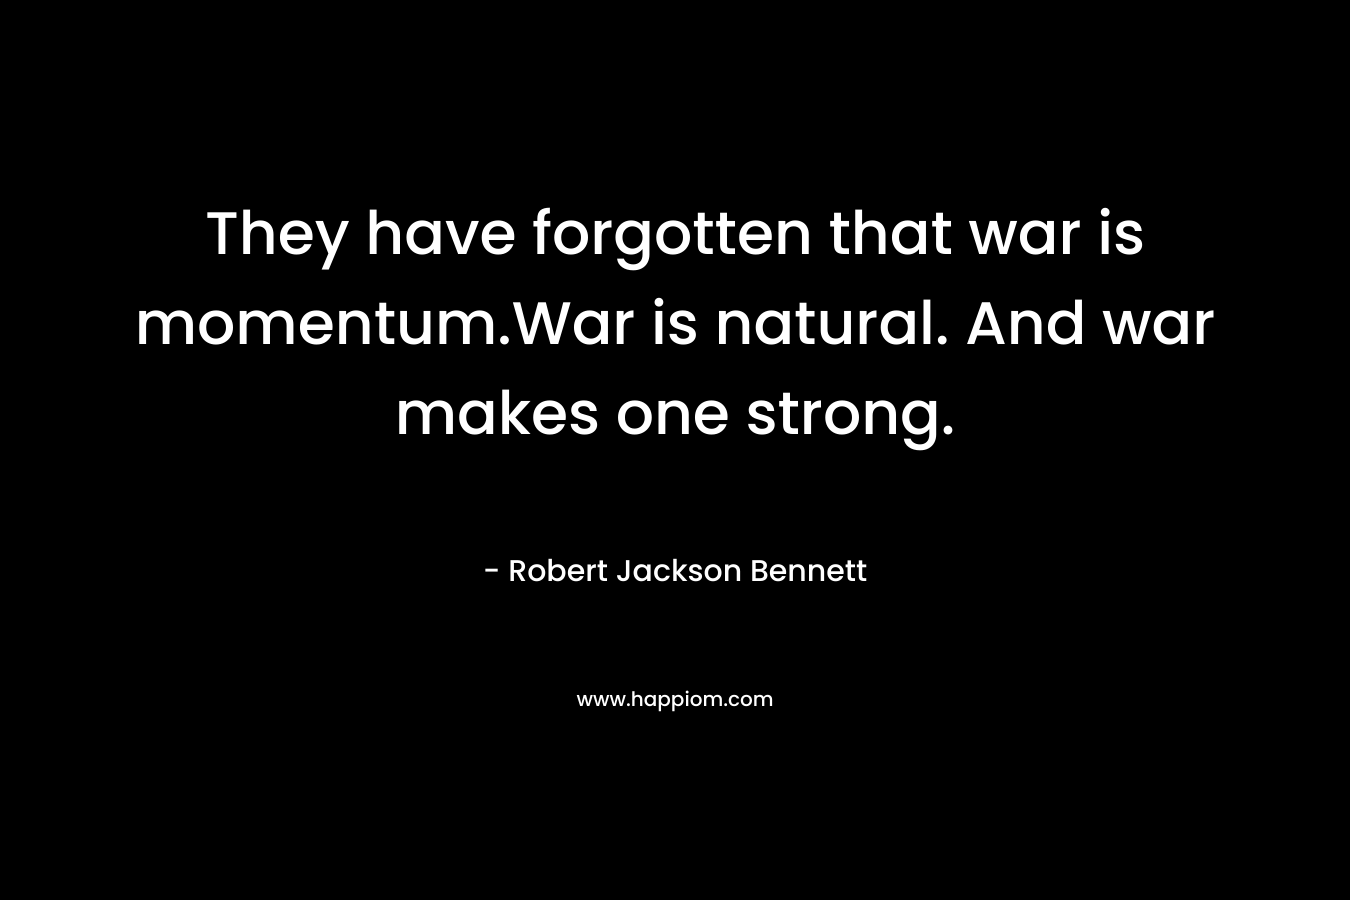 They have forgotten that war is momentum.War is natural. And war makes one strong.